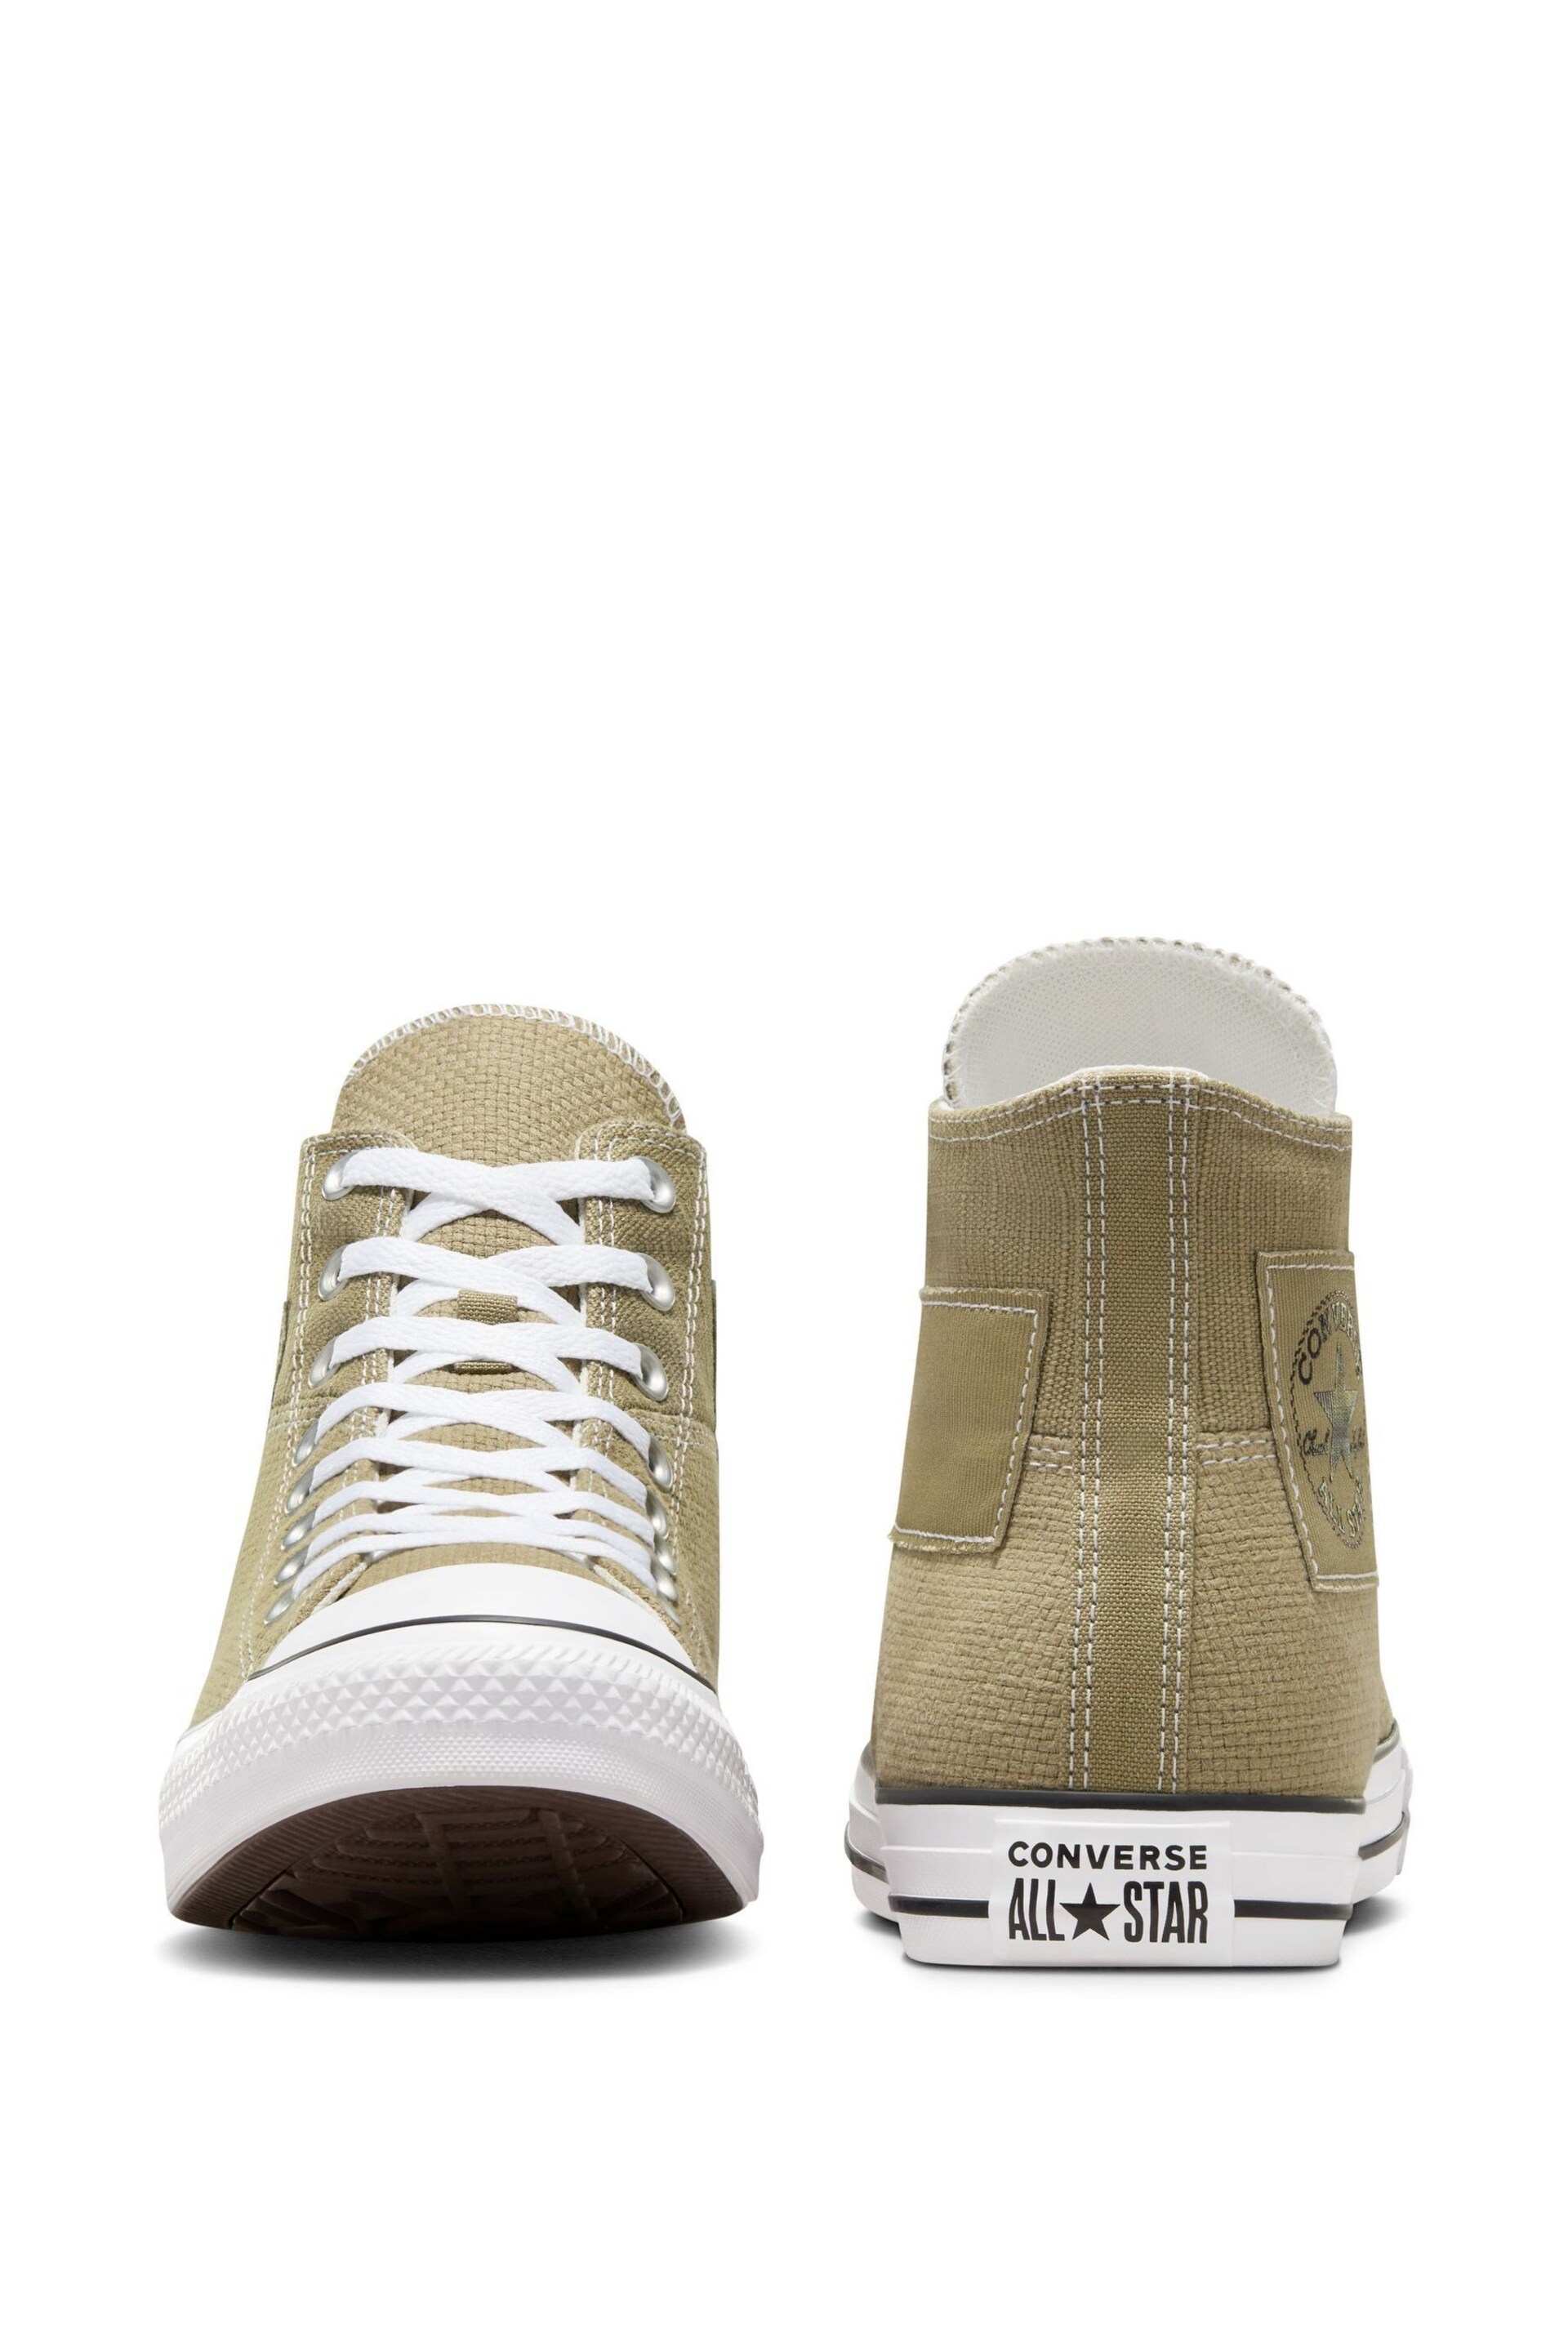 Converse Brown Chuck Taylor All Star High Trainers - Image 2 of 8